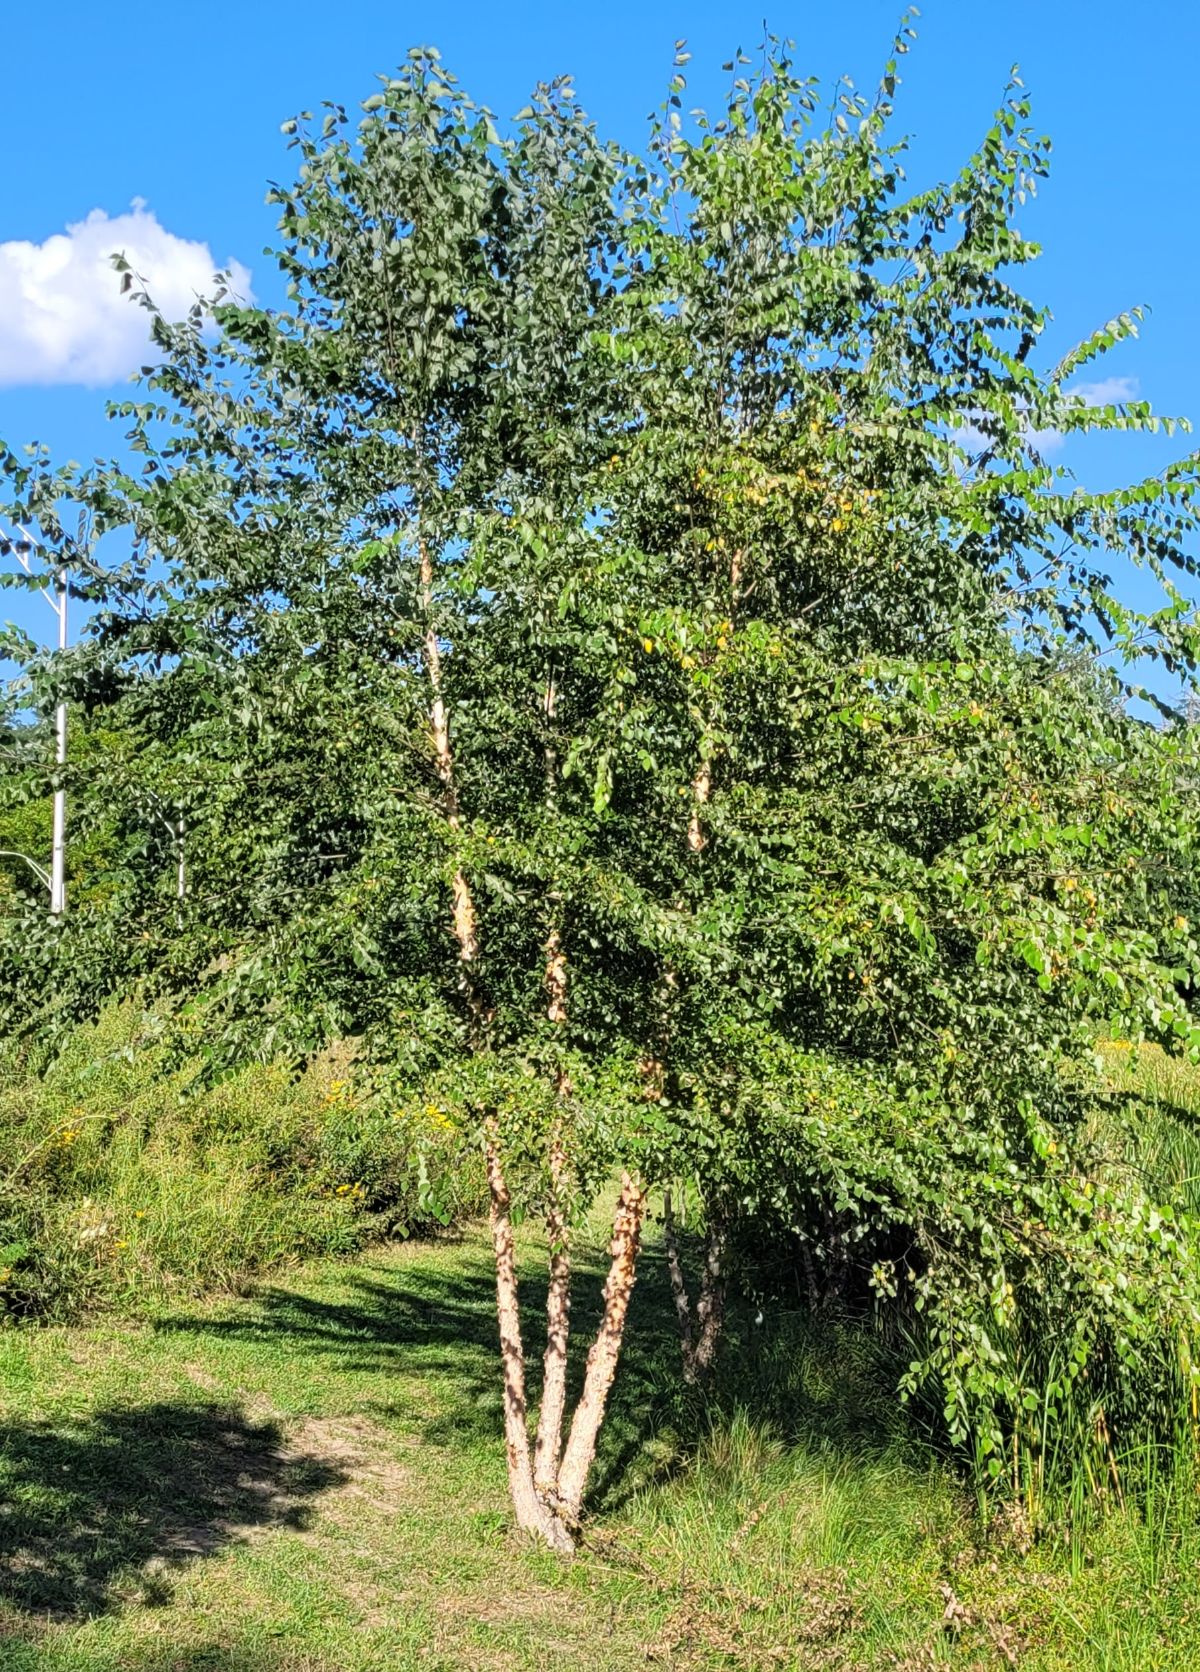 A three-stemmed river birch in a conservation area.